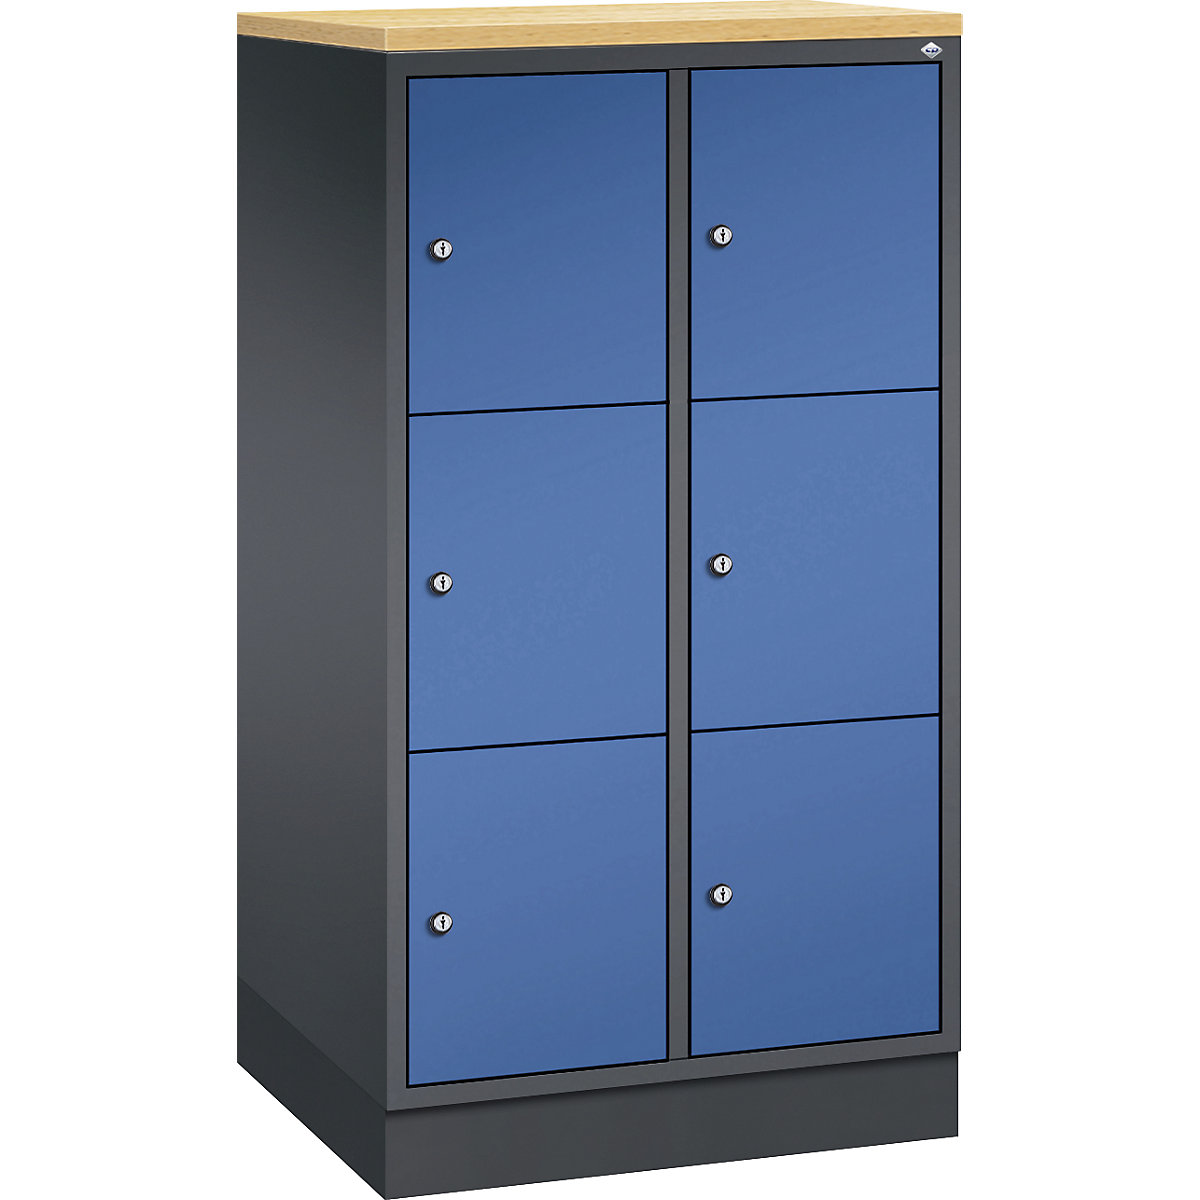 INTRO steel compartment locker, compartment height 345 mm – C+P, WxD 620 x 500 mm, 6 compartments, black grey body, gentian blue doors